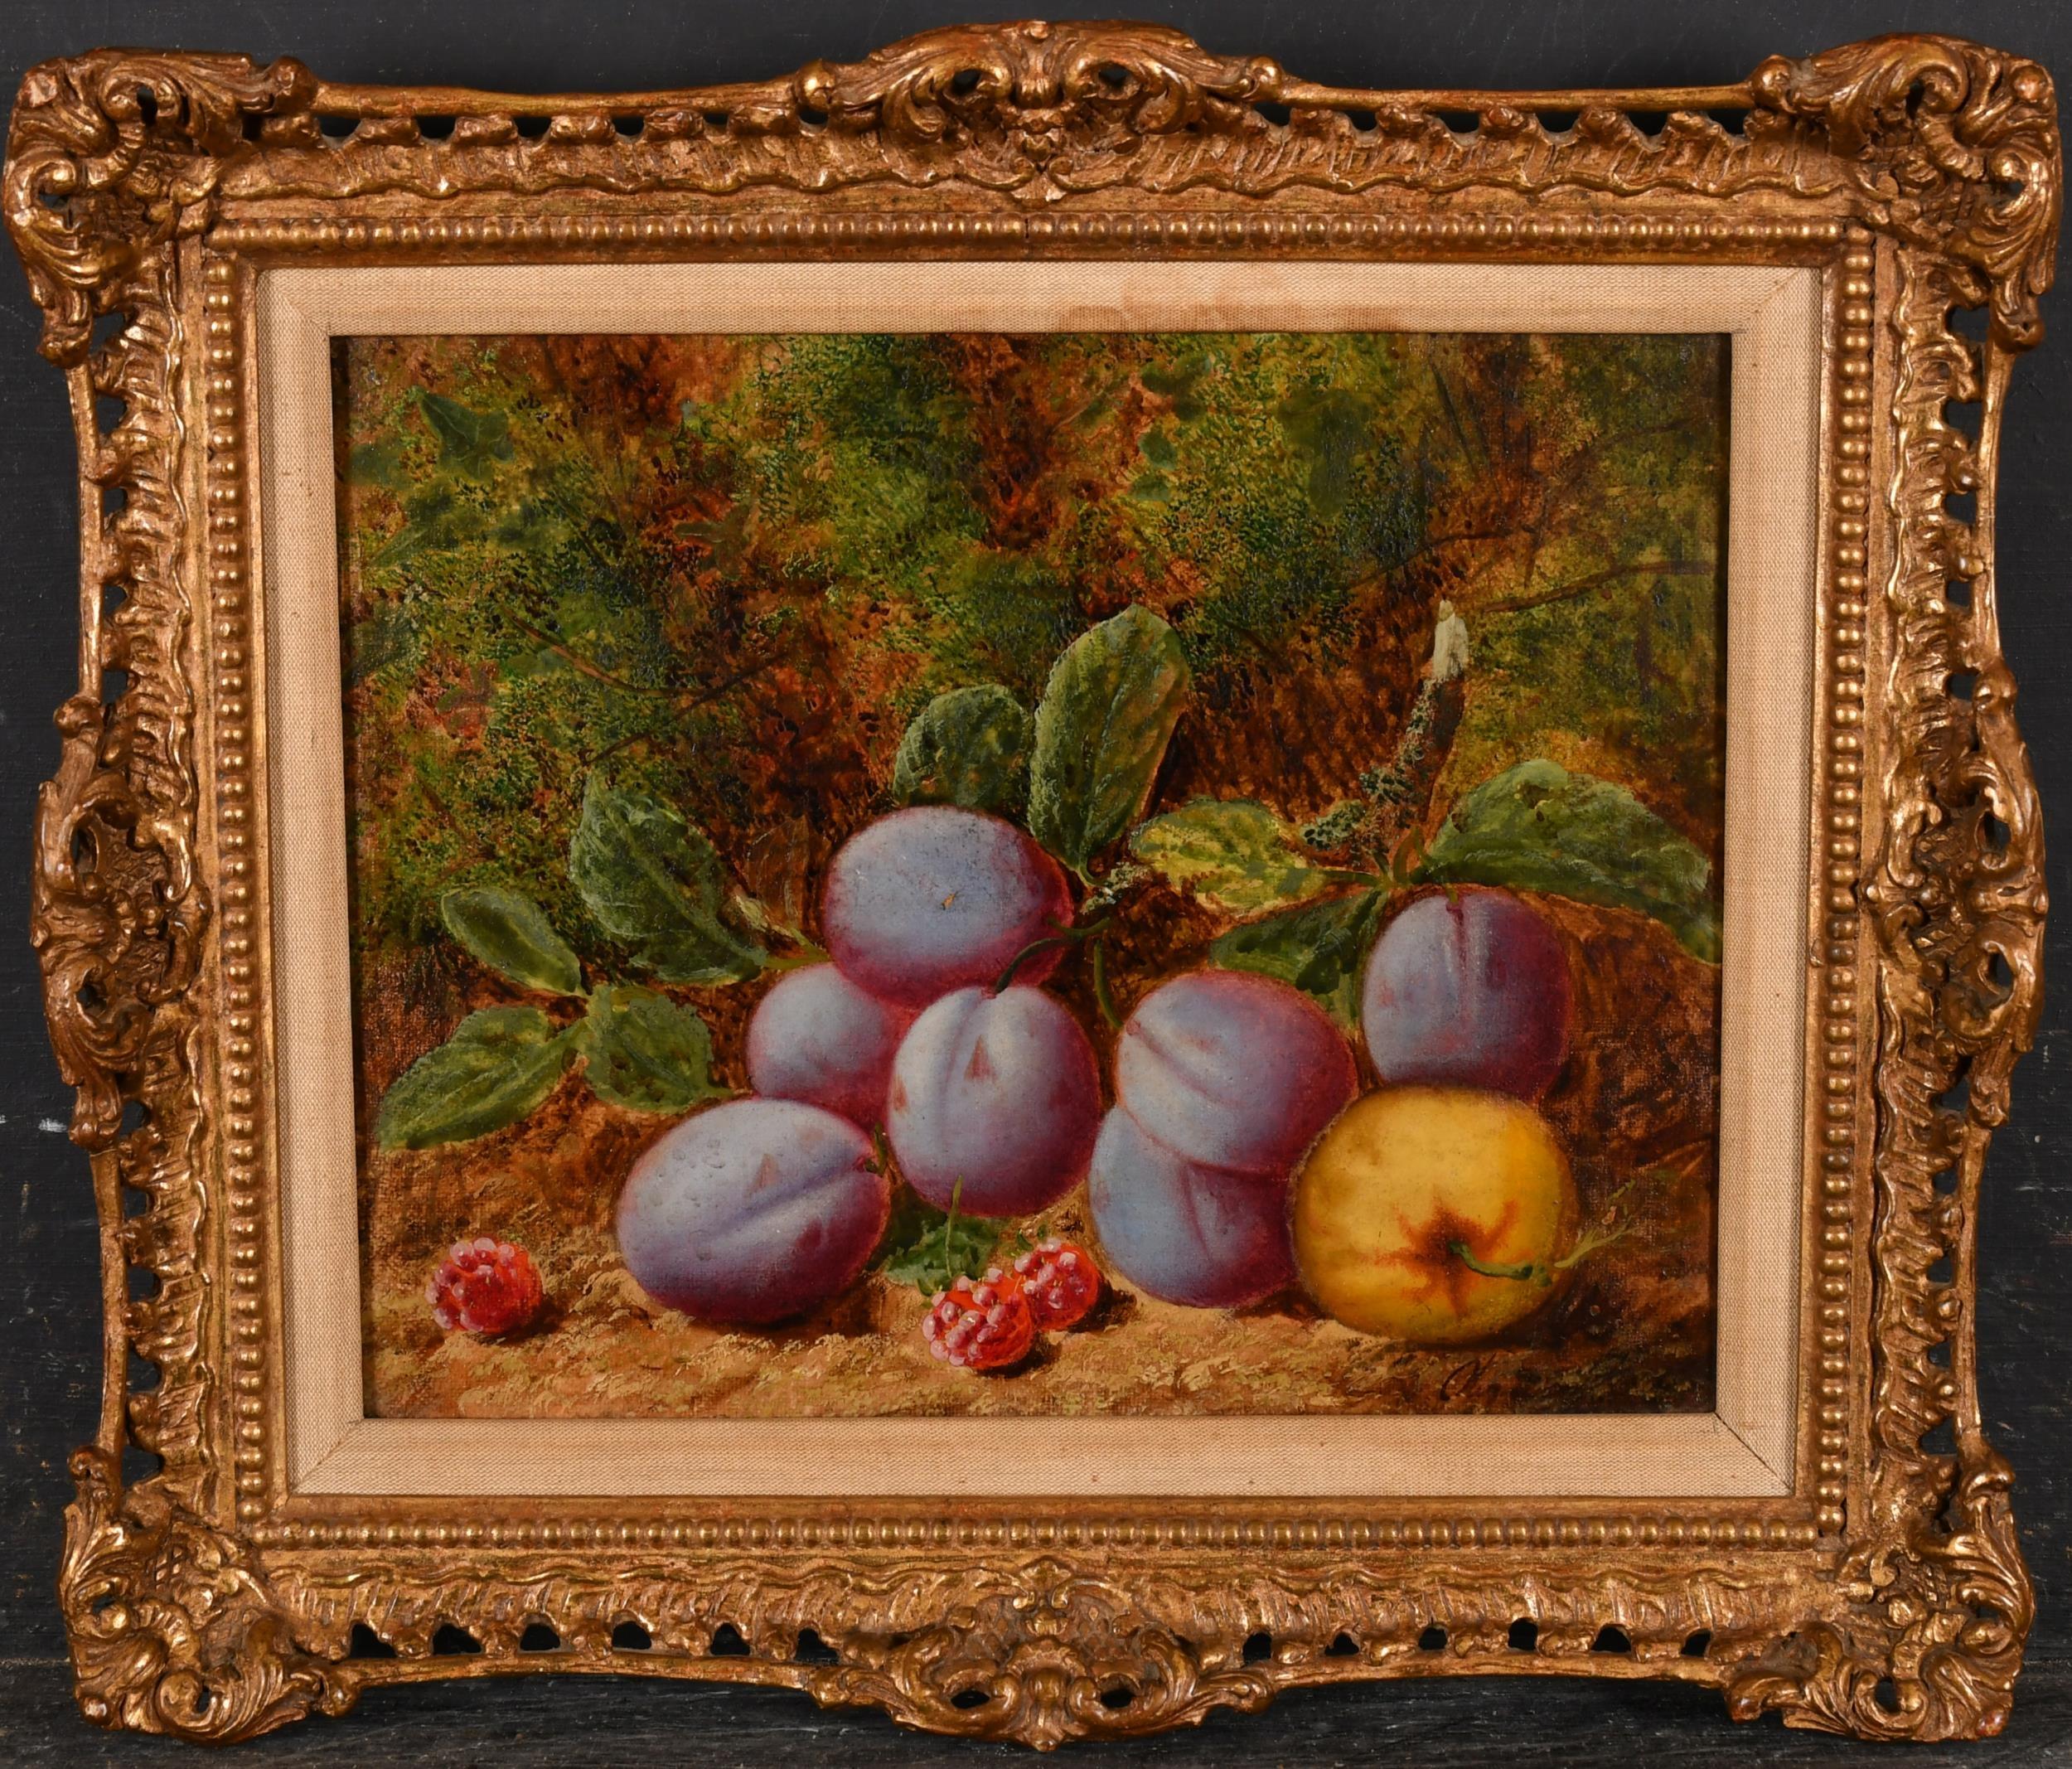 Oliver Clare Landscape Painting - Fine Victorian Oil Painting Plums Raspberries & Quince Still Life